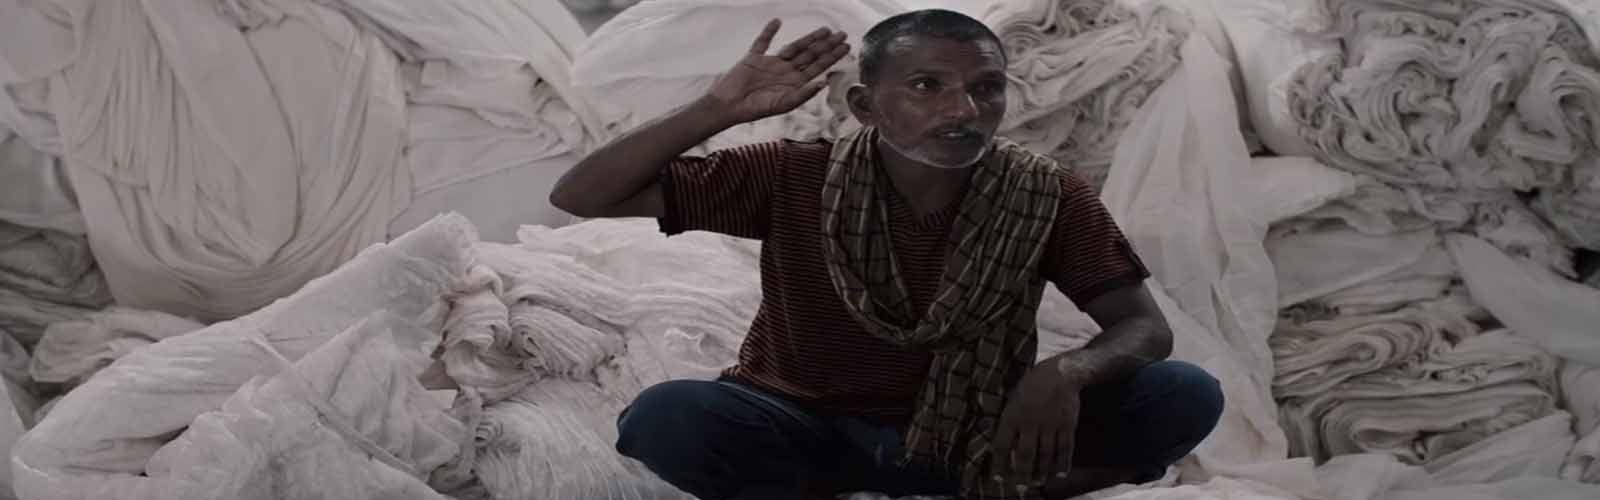 Poor and sick: Film spotlights plight of India's textile workers